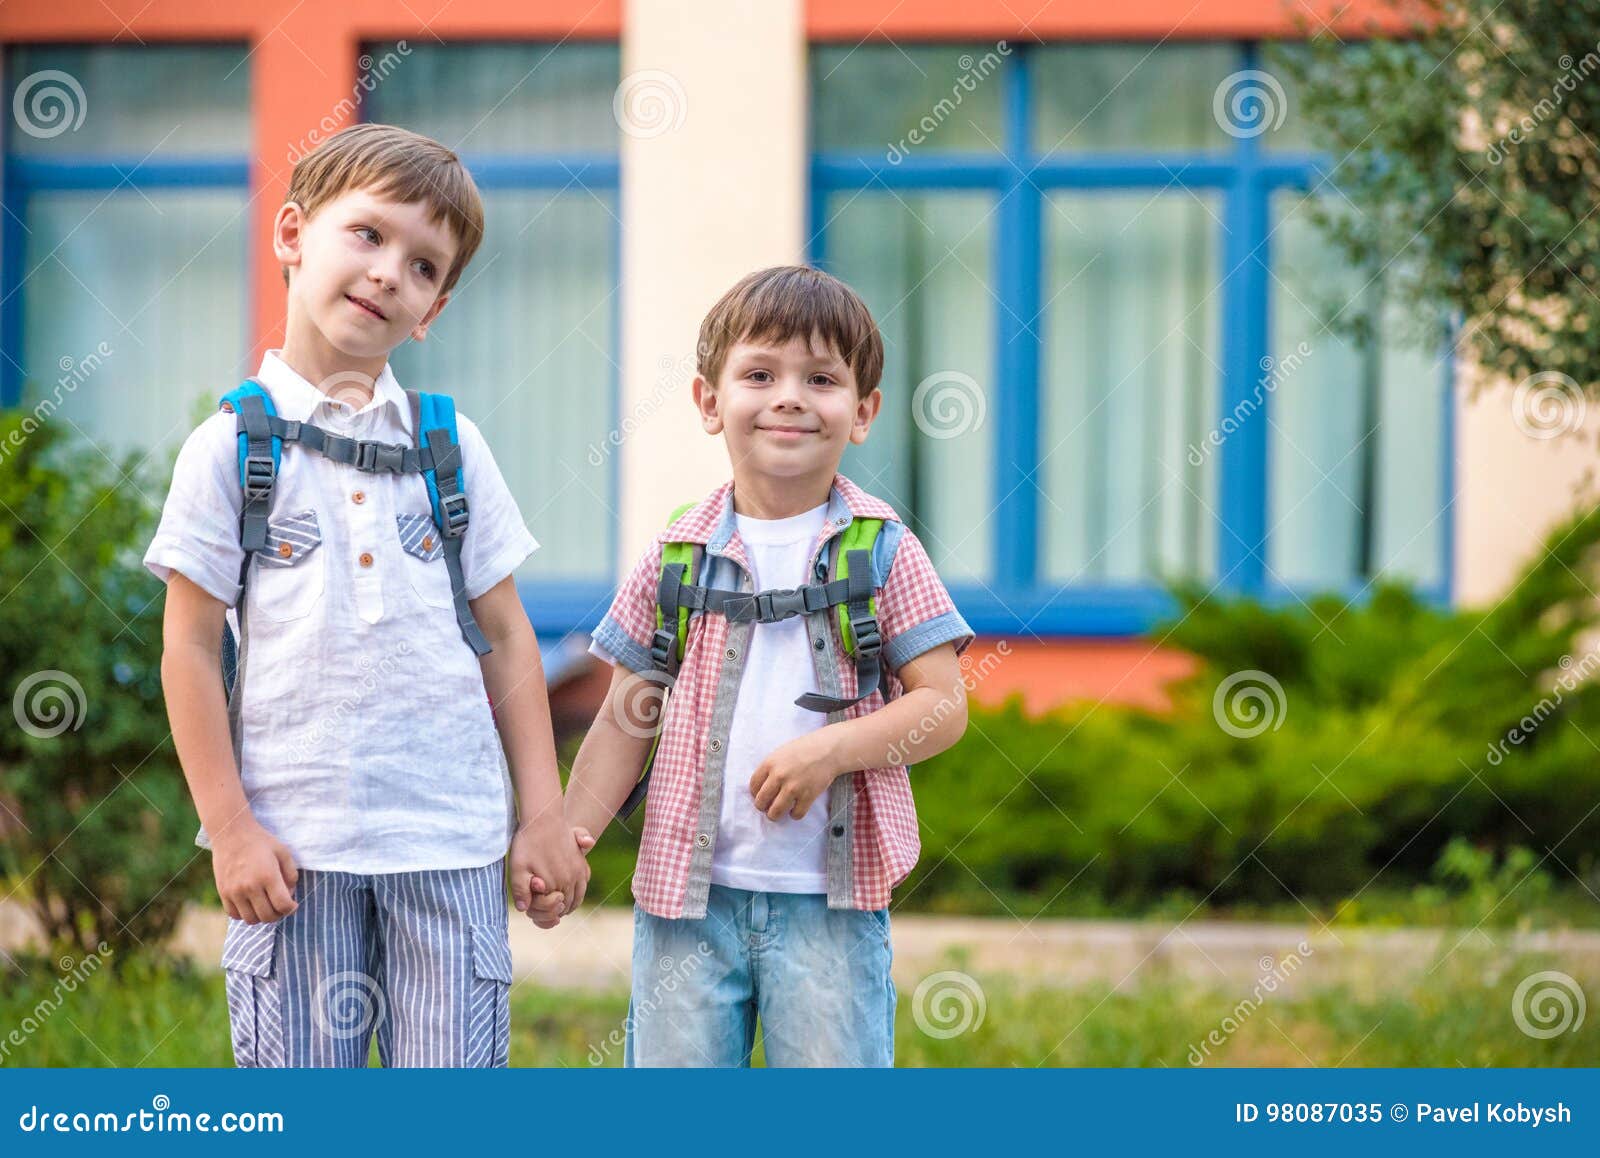 Young Students, Two Sibling Brothers, Going To School